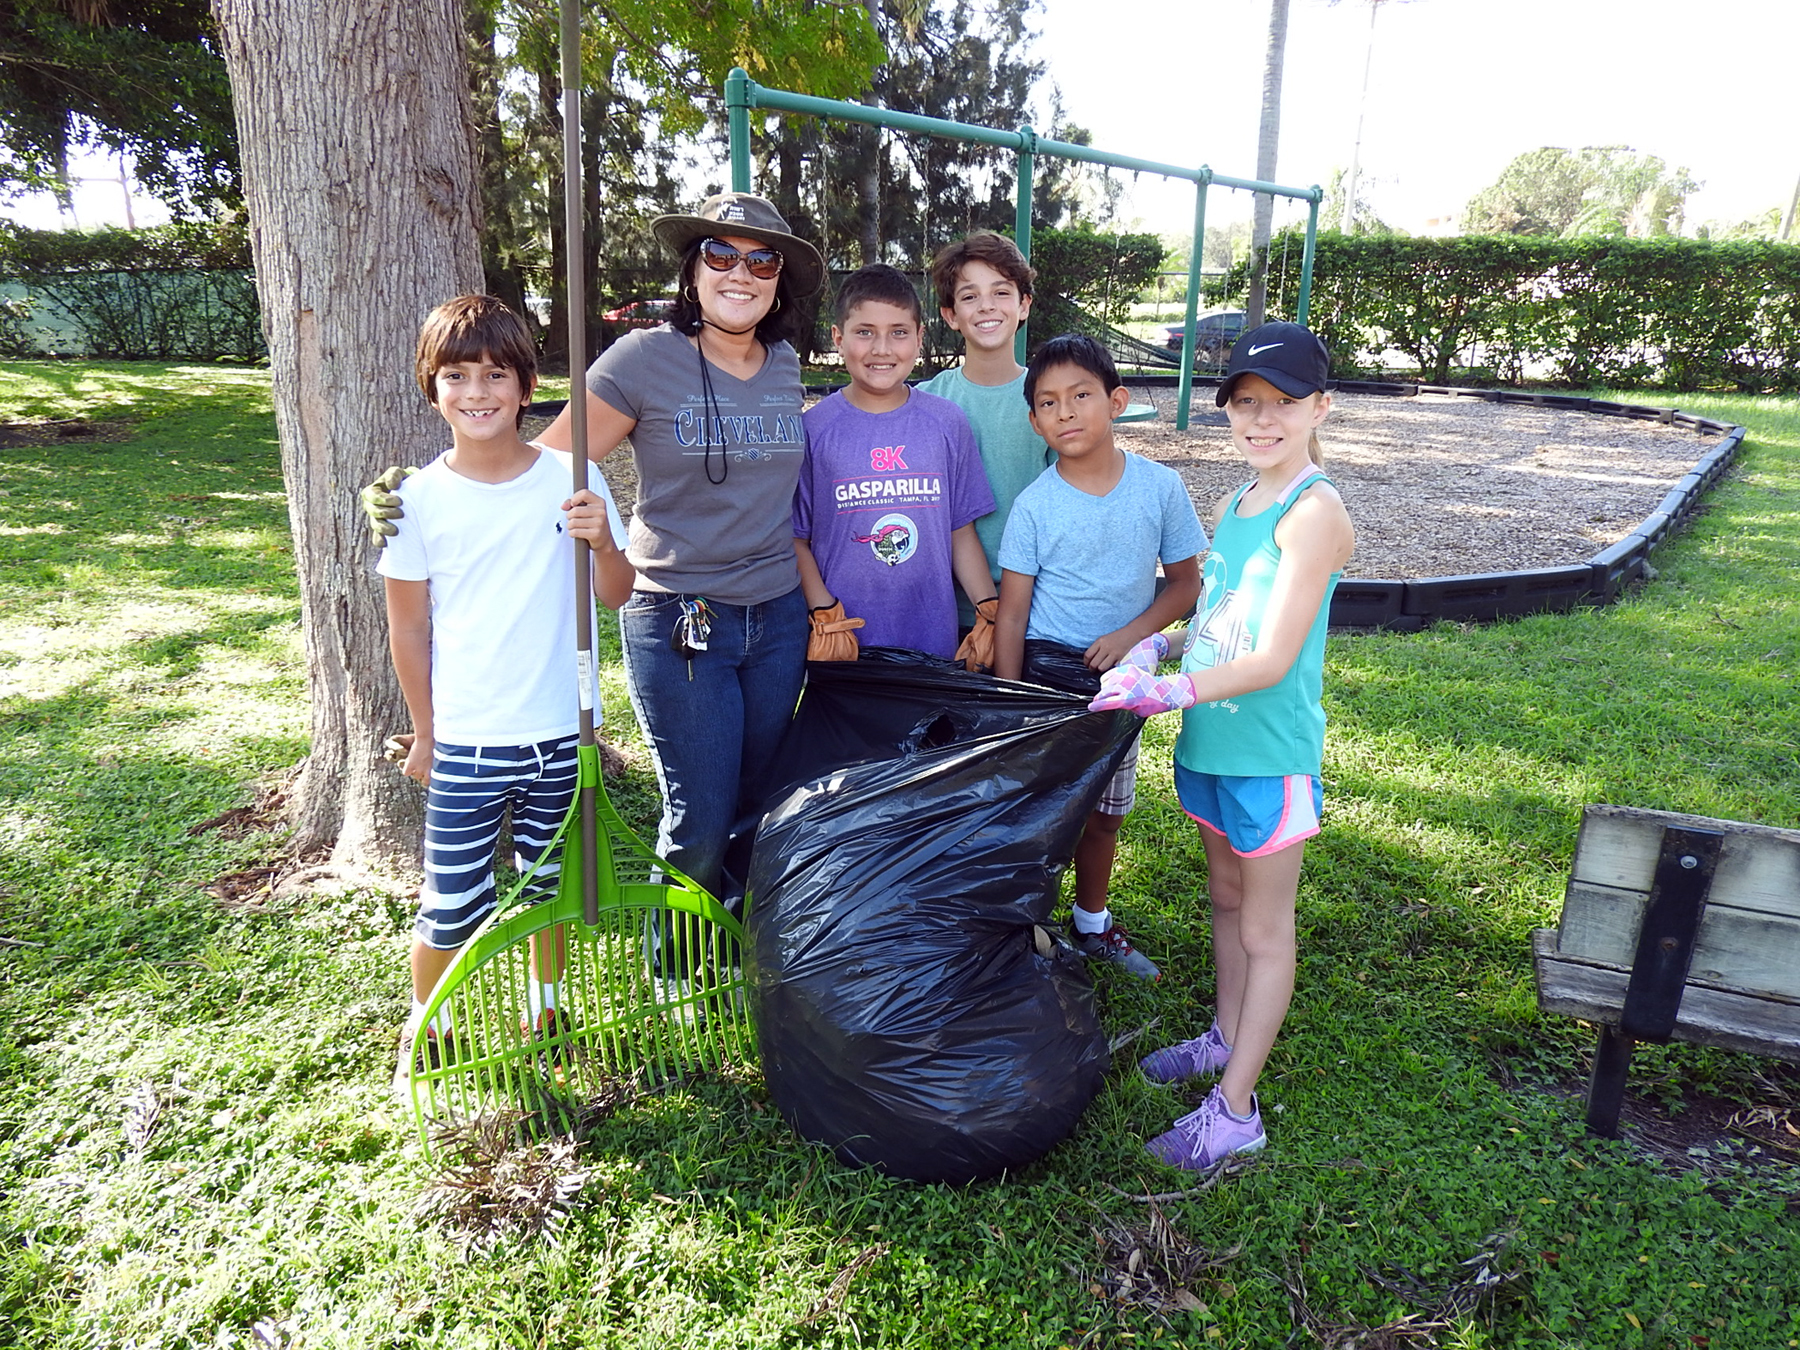 Divina Elan, second from left, Hershorin Schiff Community Day School’s admissions and business systems coordinator, is joined for a day of Irma clean up by Michel Mayer, Jacob Lirio, Gustavo Mayer, Alex Hryniewicz and Mila Meyer.